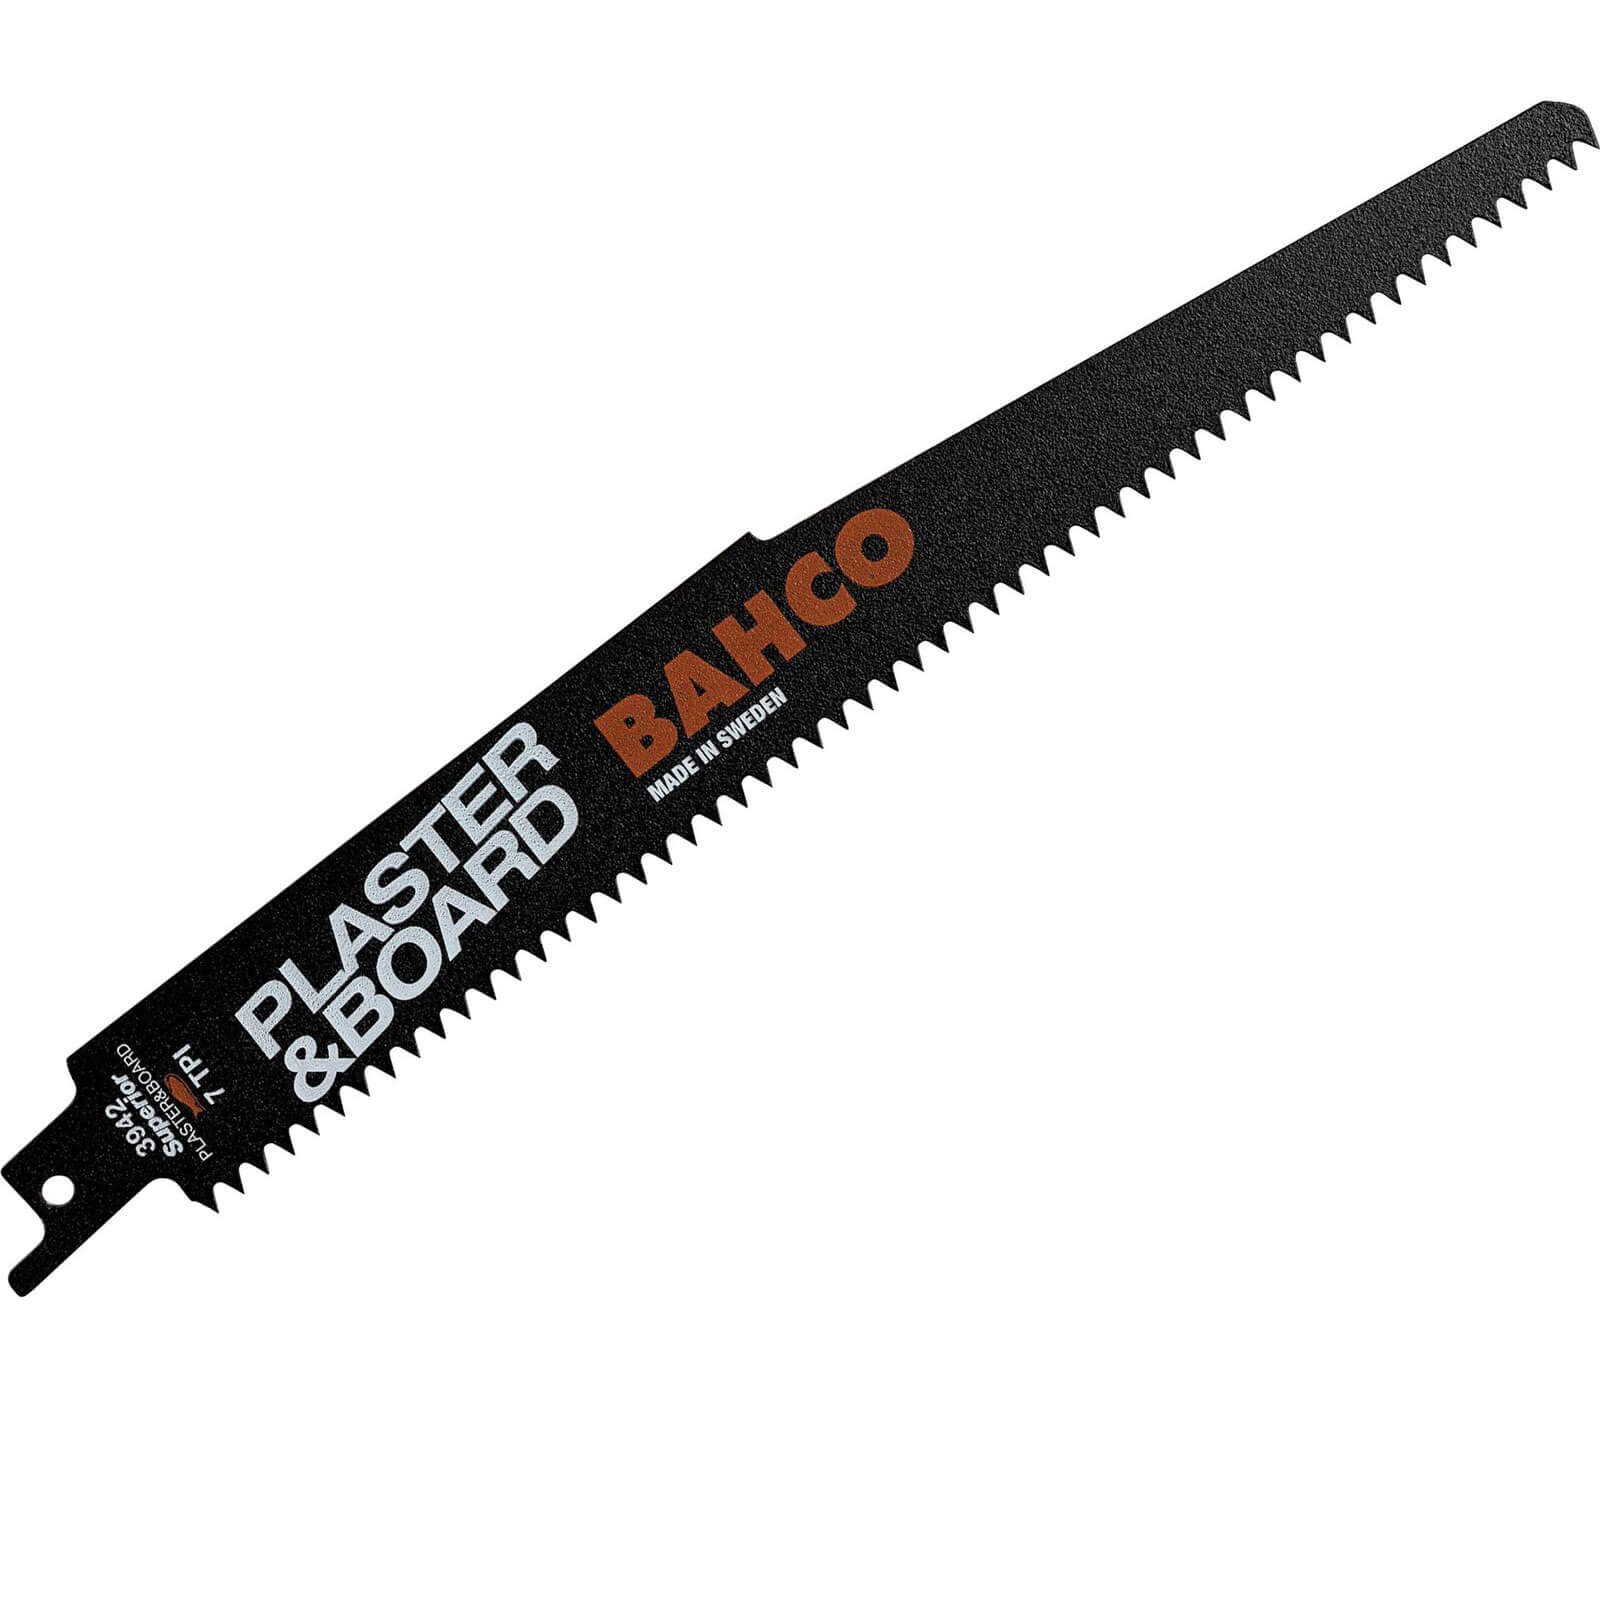 Image of Bahco Reciprocating Sabre Saw Blades for Plaster and Board 228mm Pack of 5